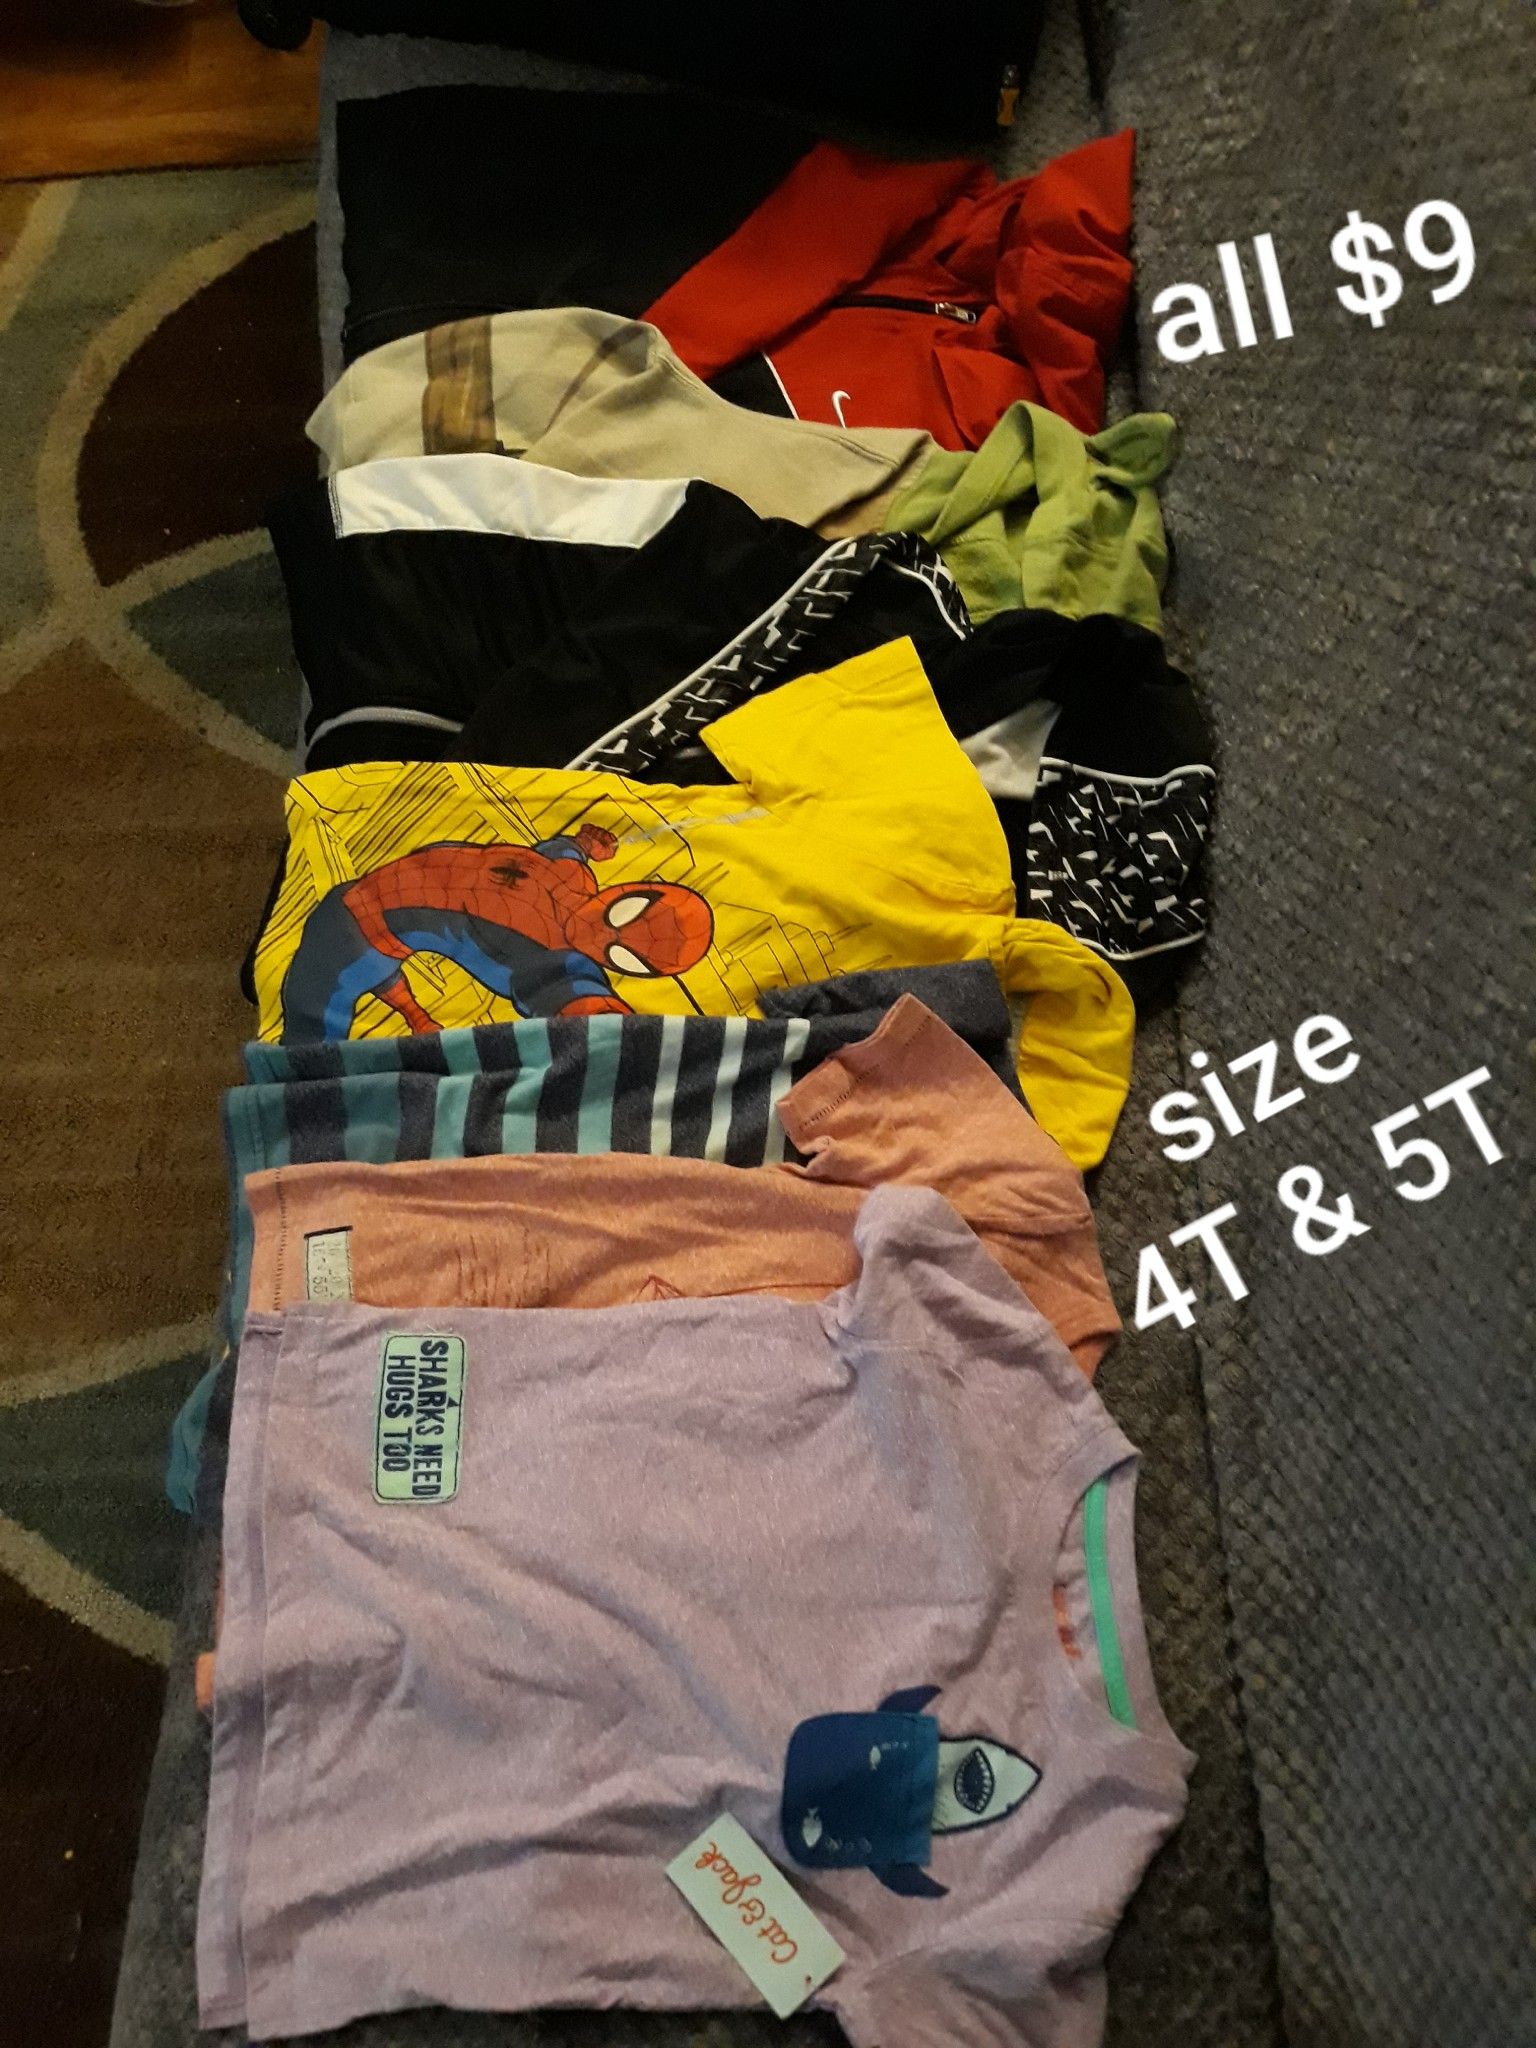 Used clothes, A shirt is new, all for $9